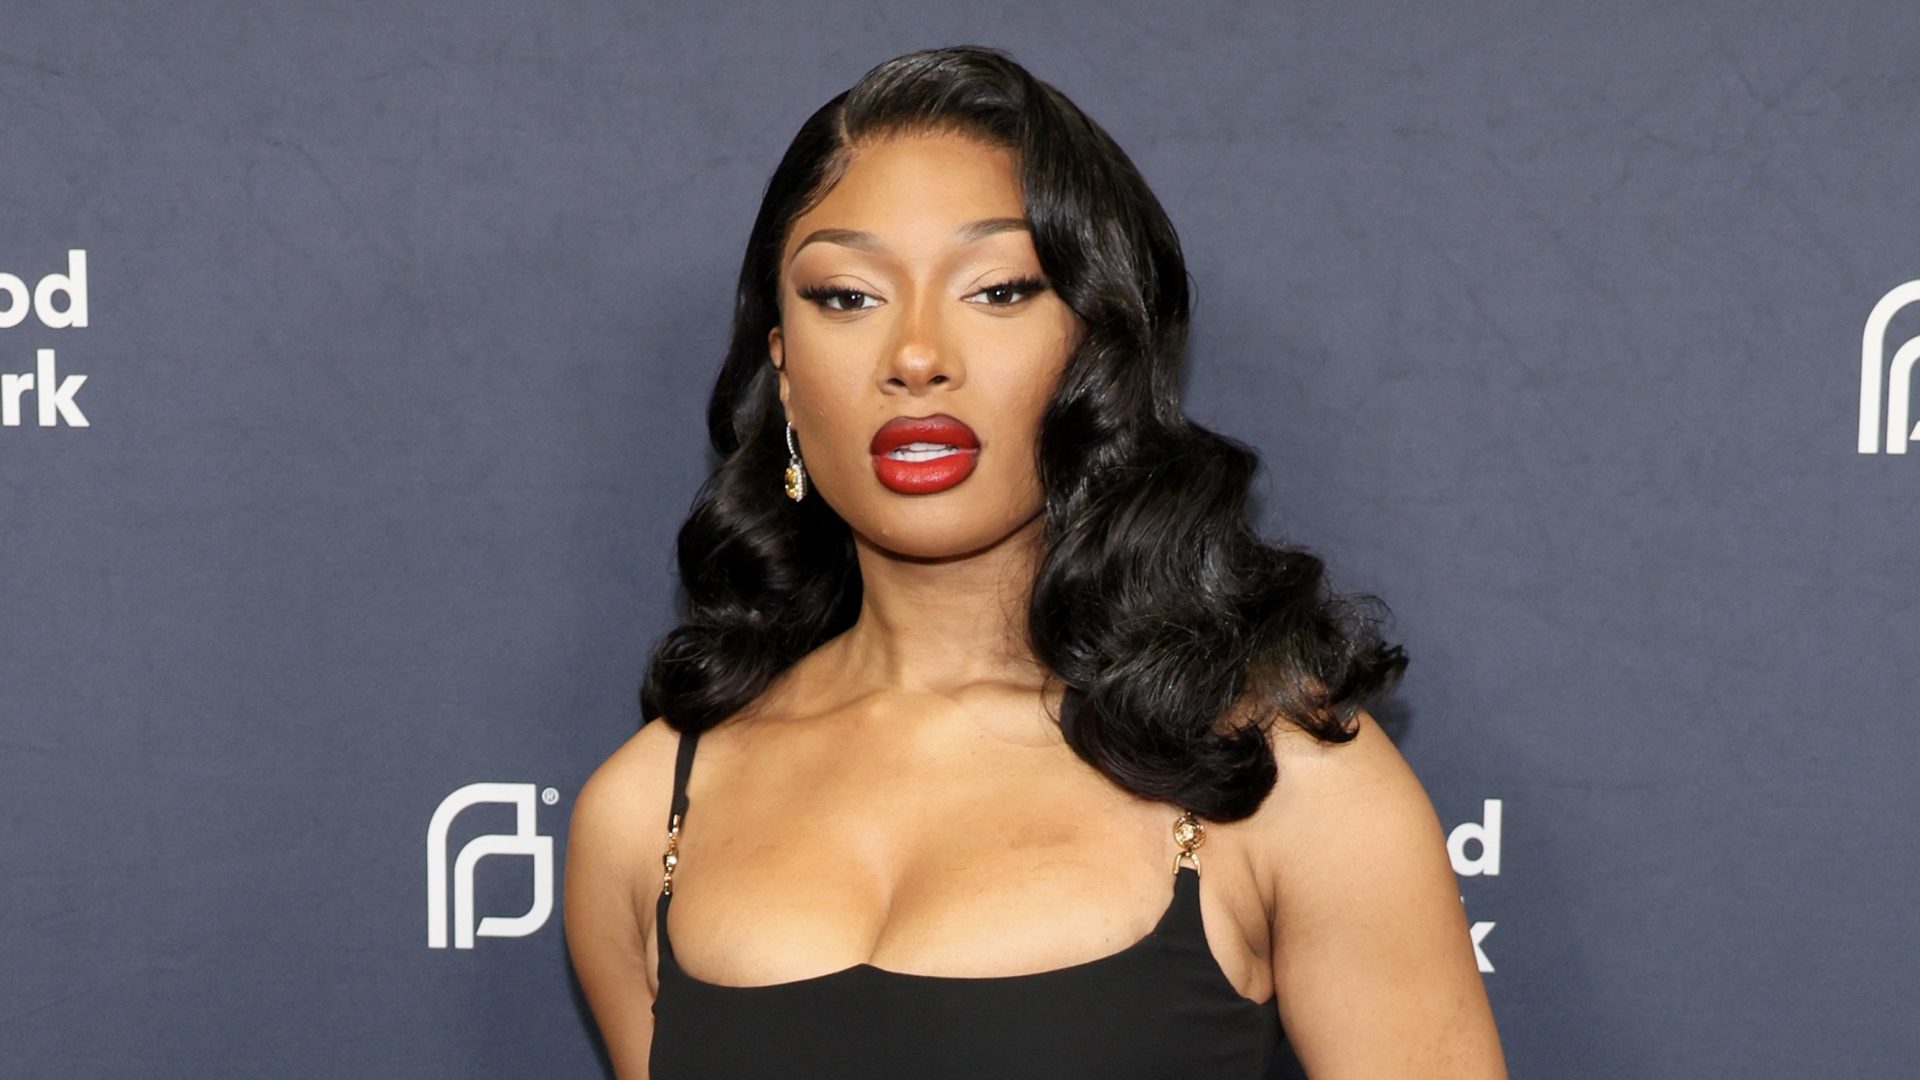 Megan Thee Stallion Accused Of Harassment By Former Photographer Who Alleges He Was Forced To Watch Her Being Intimate thumbnail